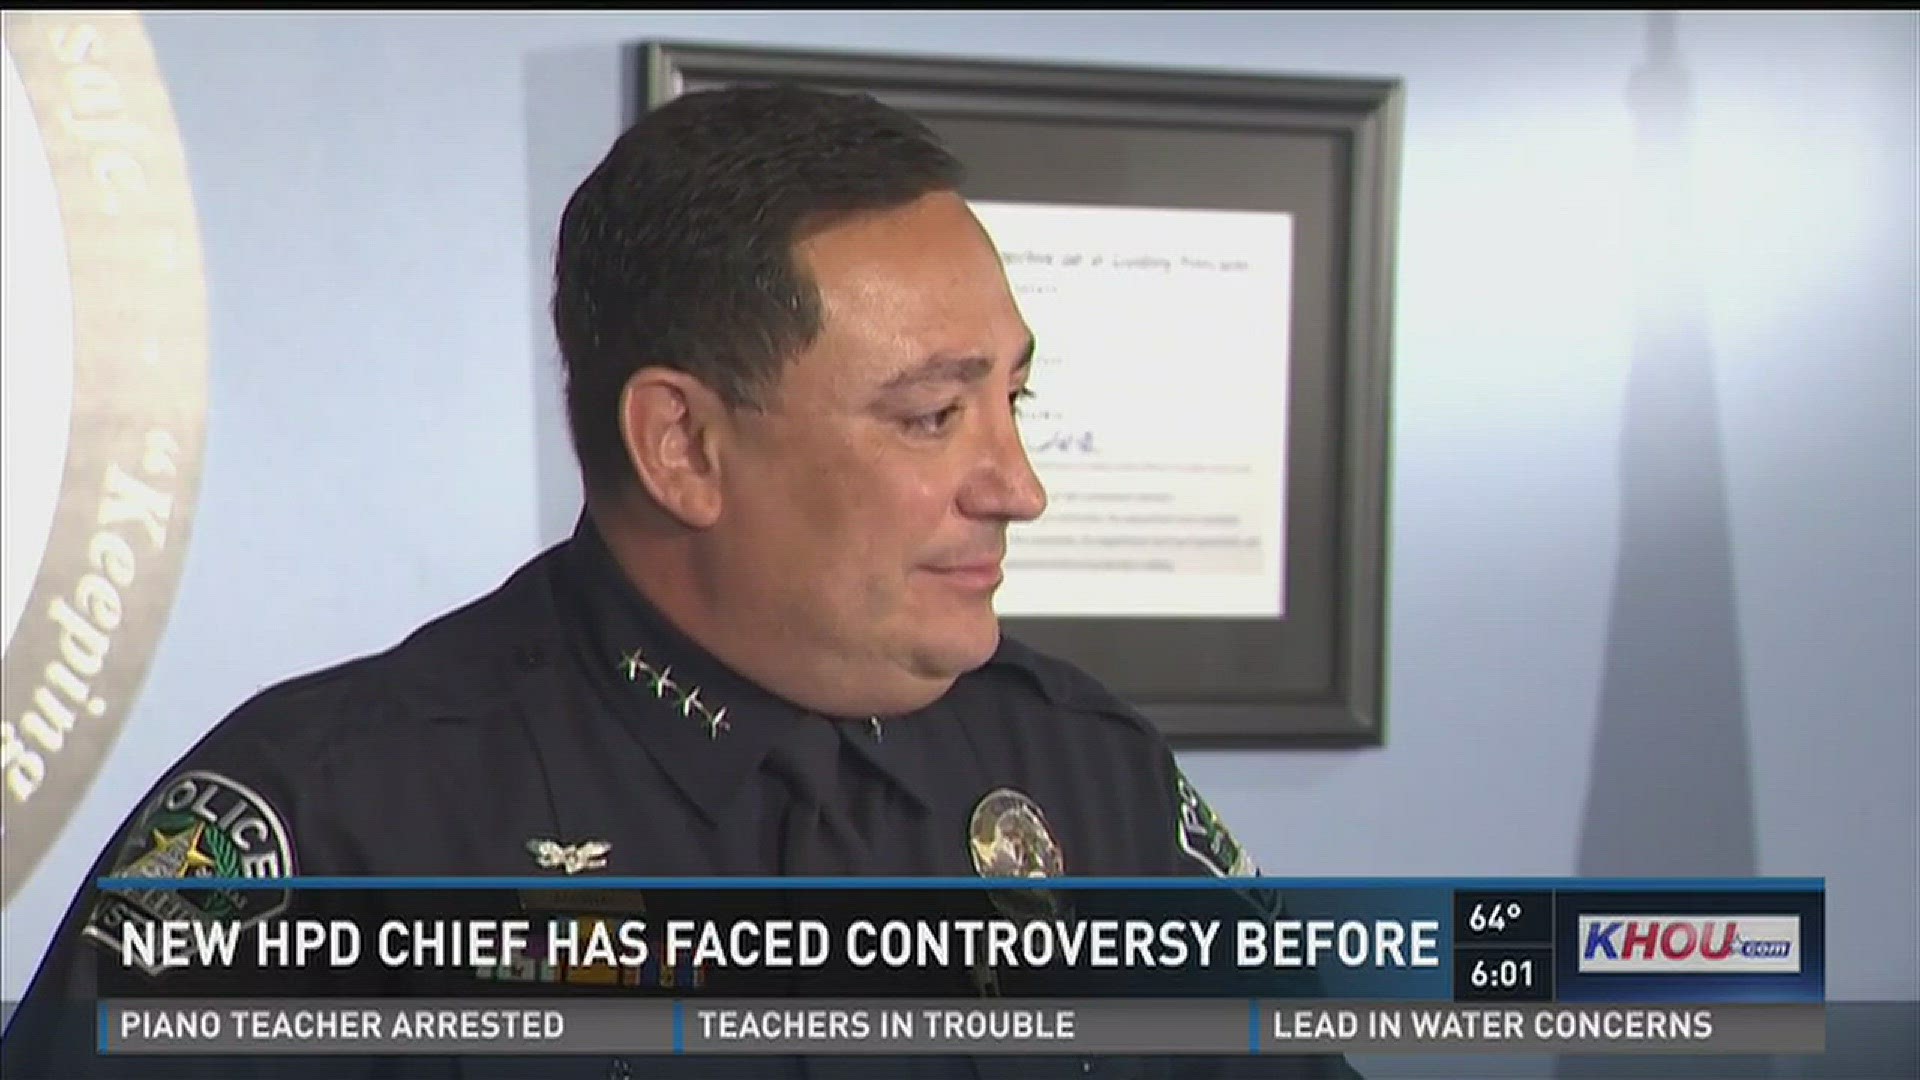 Art Acevedo, the new chief of the Houston Police Department, has faced controversy in his most recent stint as Austin's police chief.